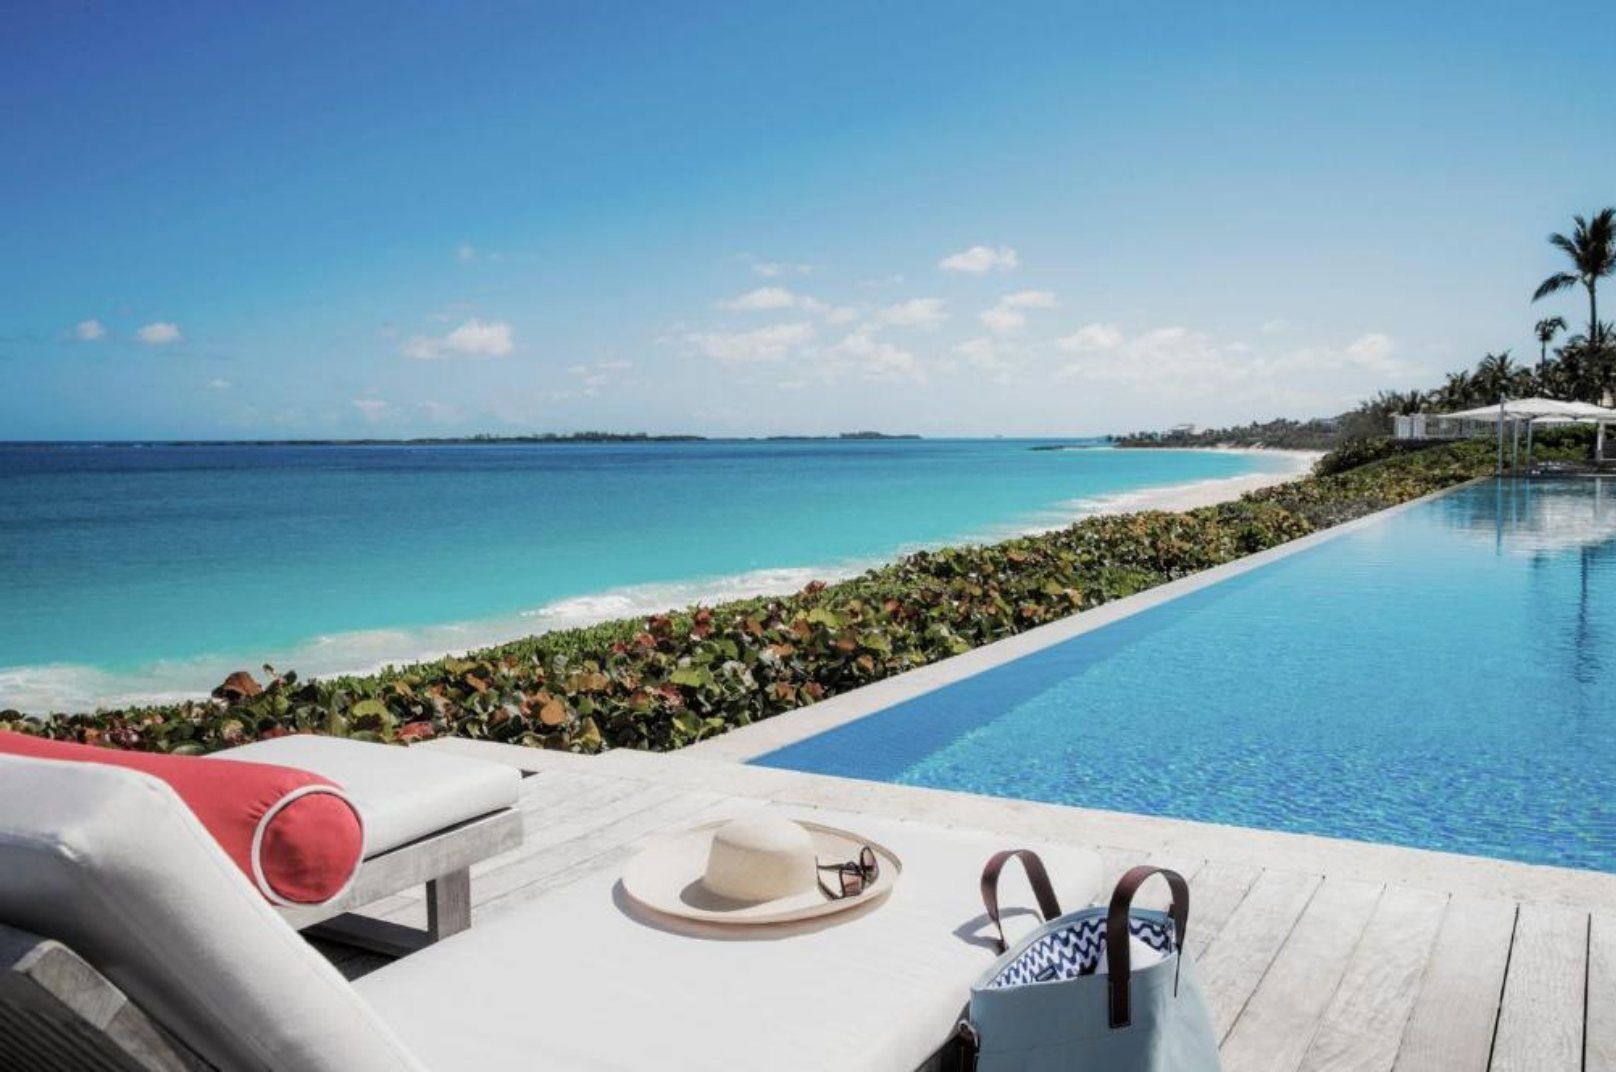 The best hotels in The Bahamas